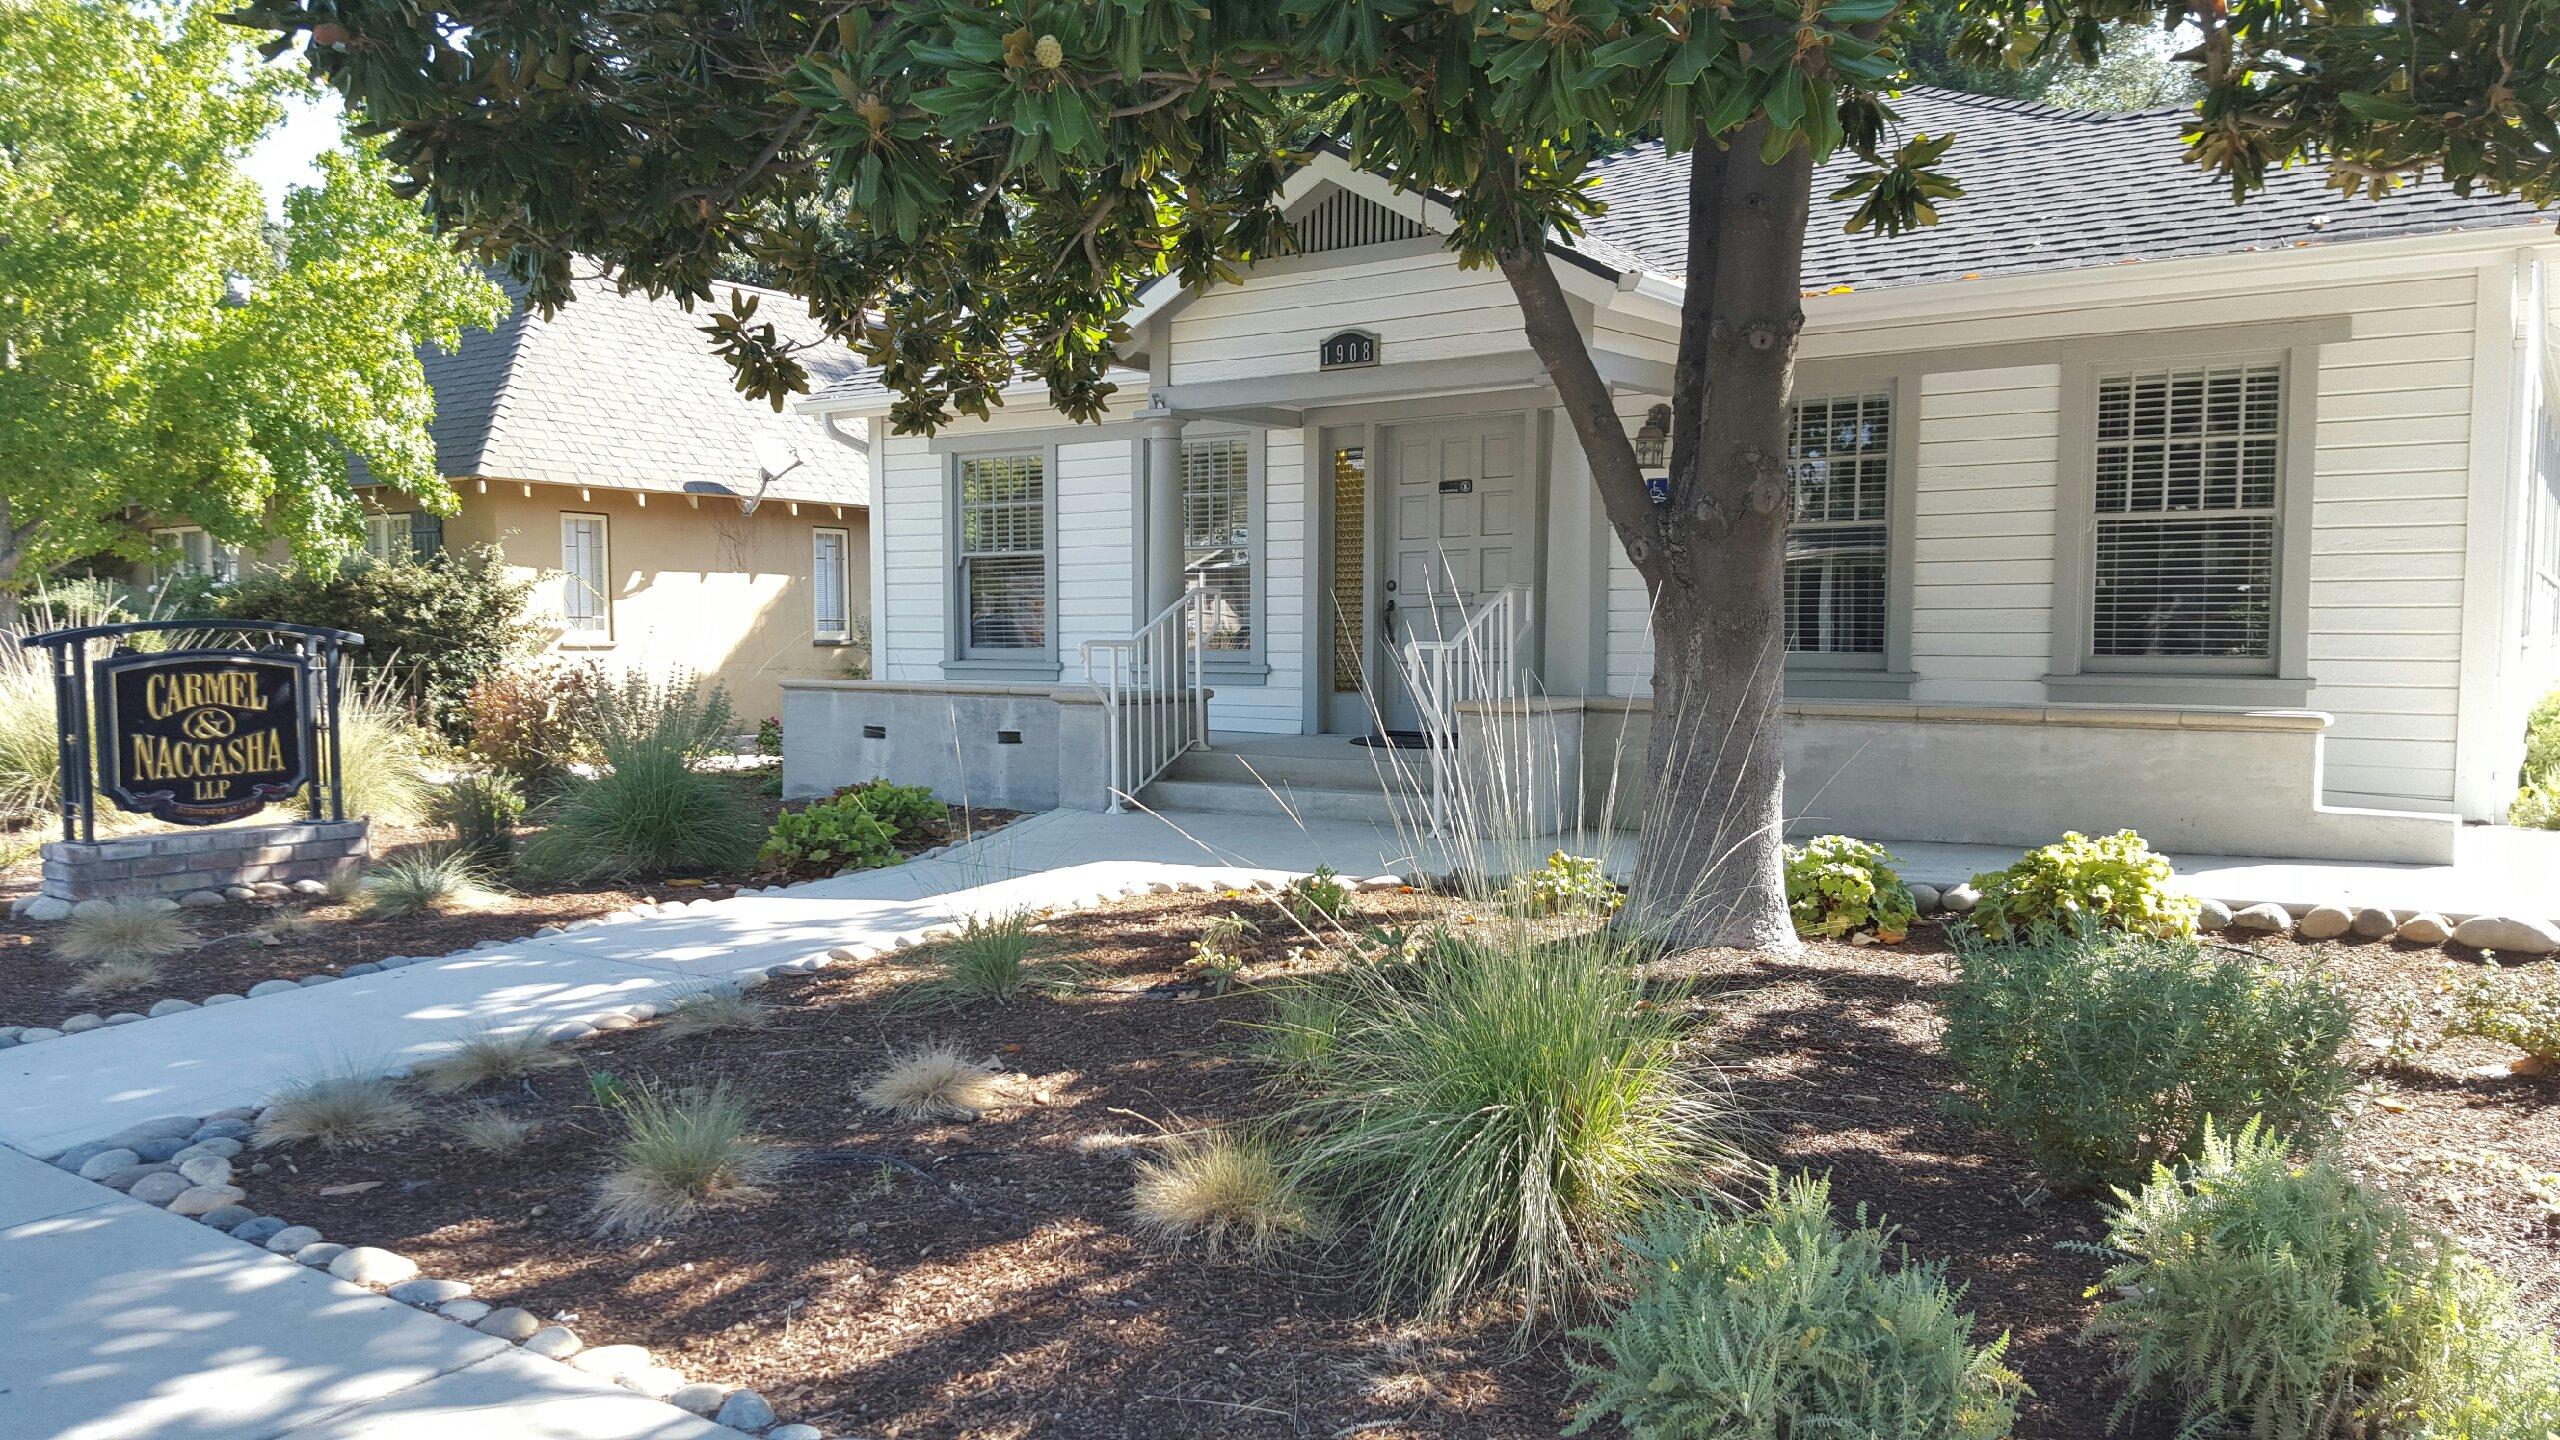 Drought tolerant plants and landscaping at Carmel & Naccasha's Paso Robles office.